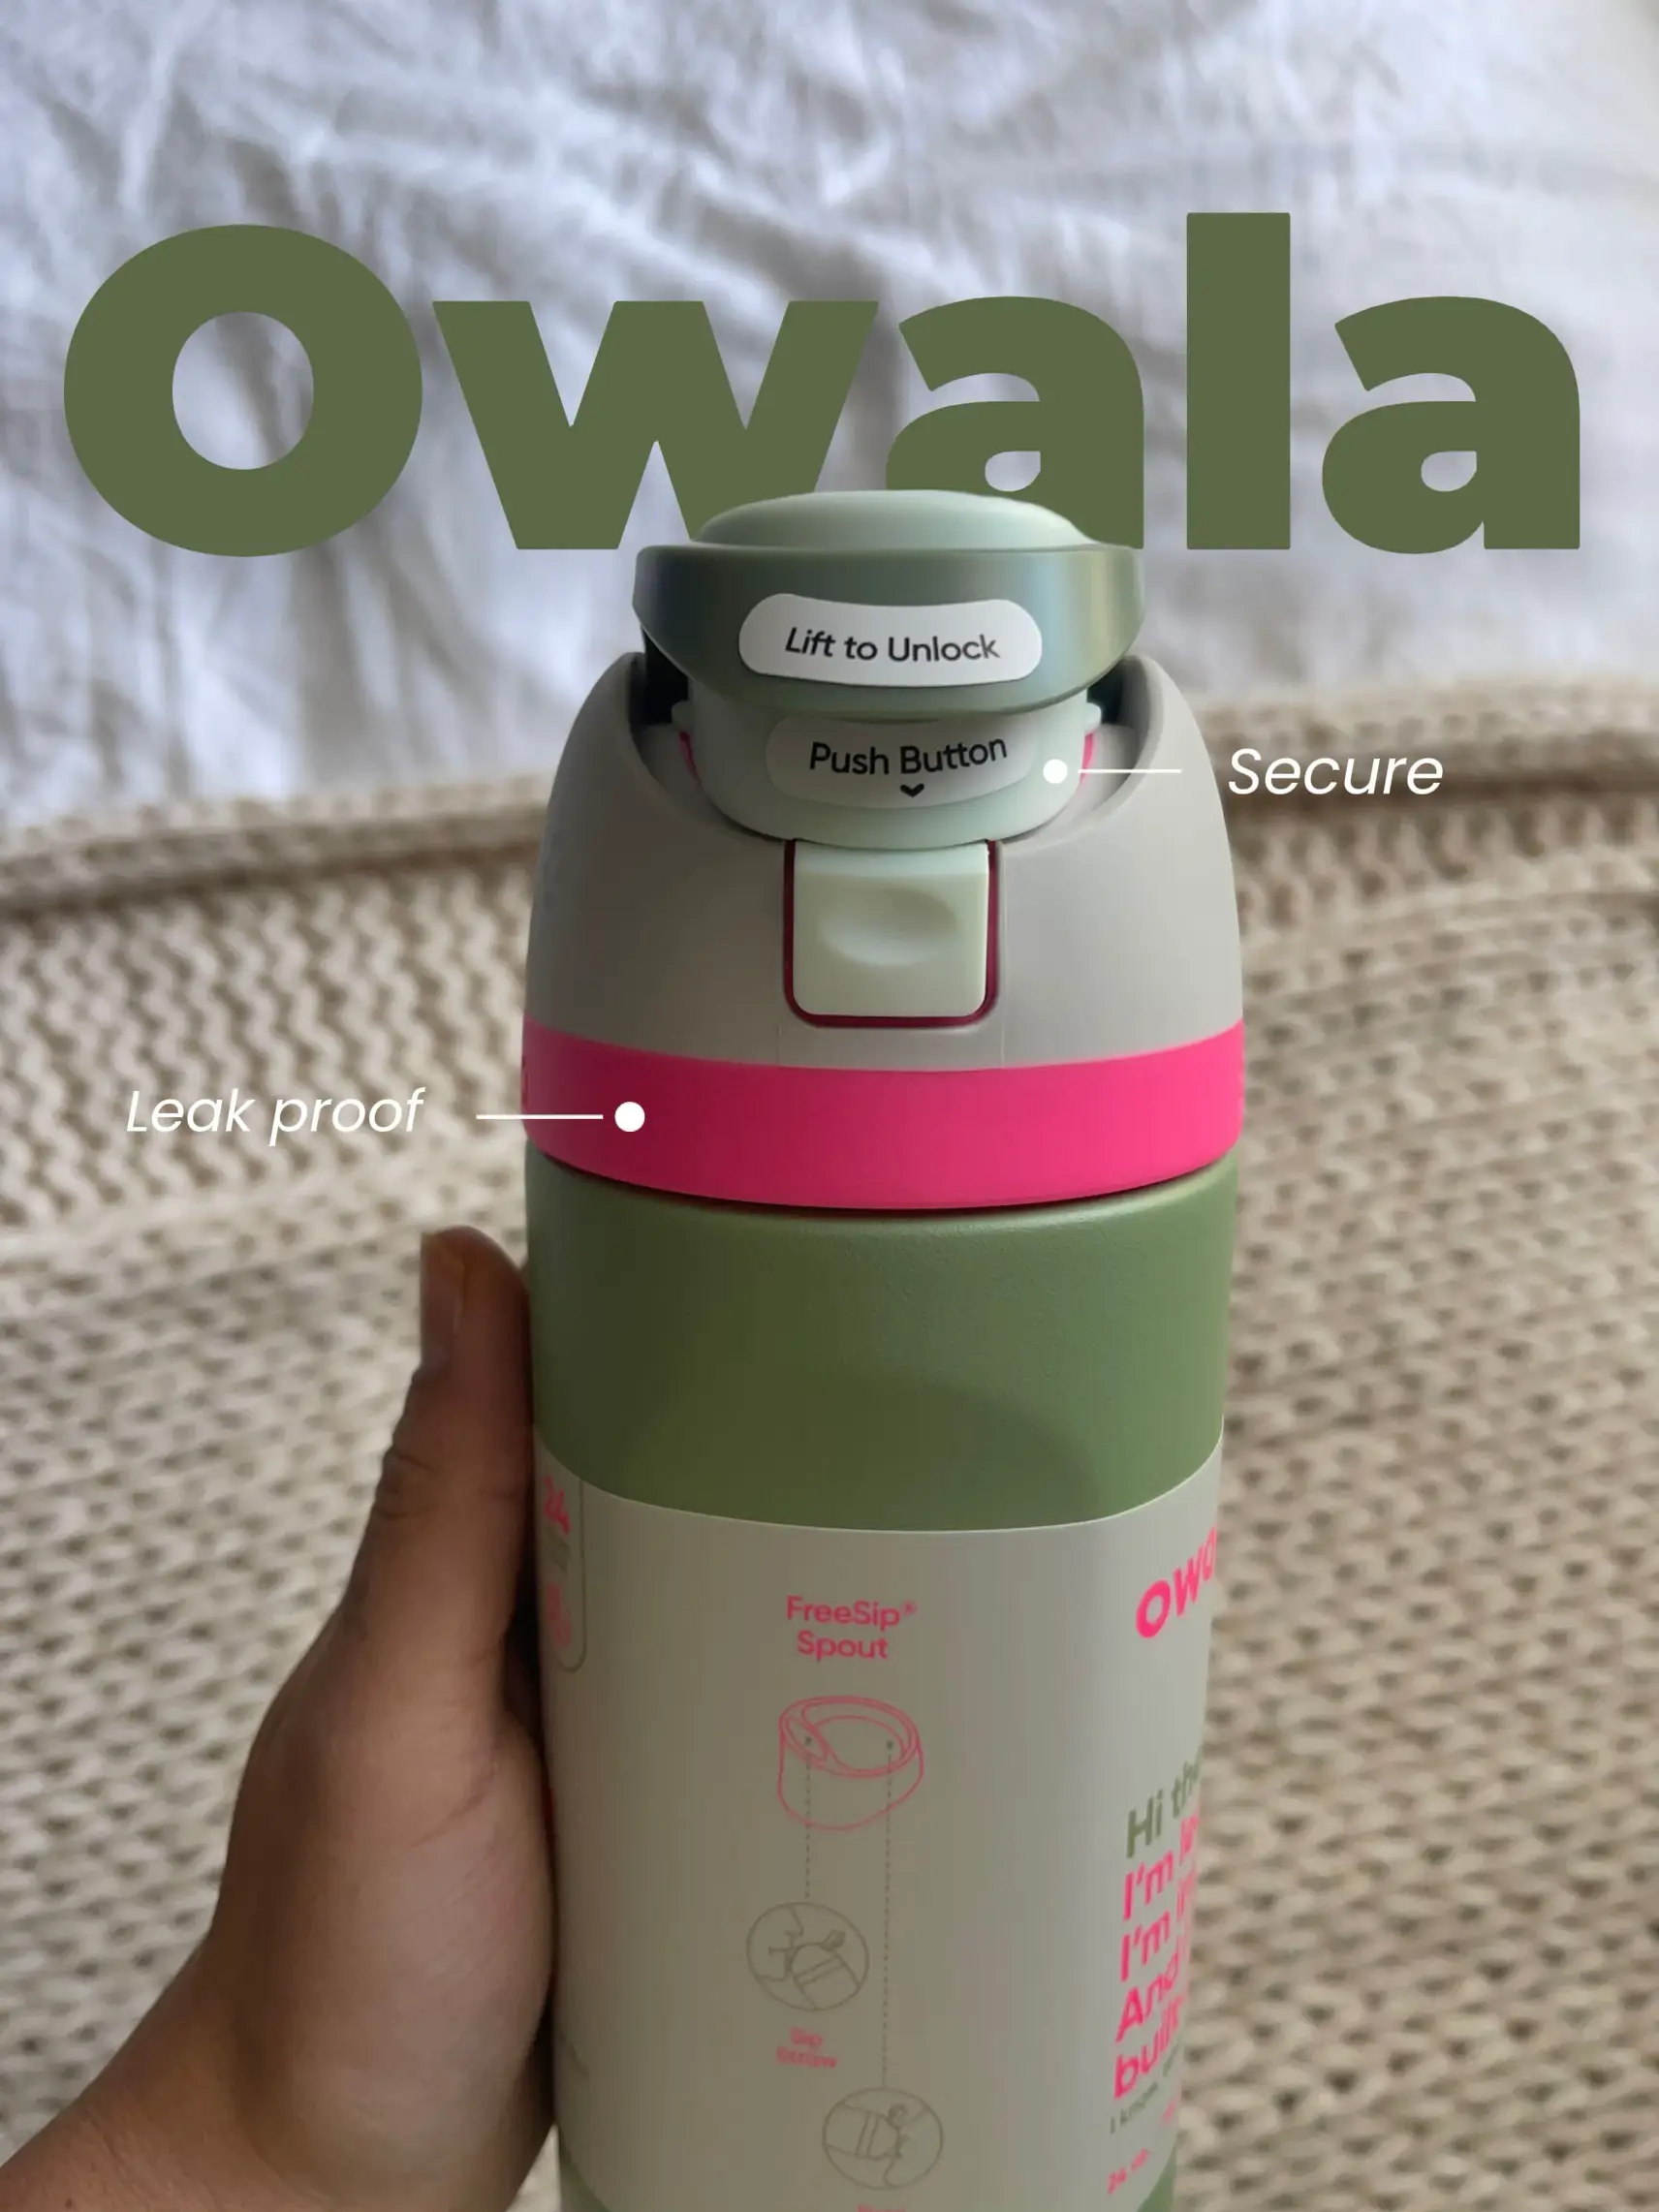 owala worth the hype?, Gallery posted by celesteprentice